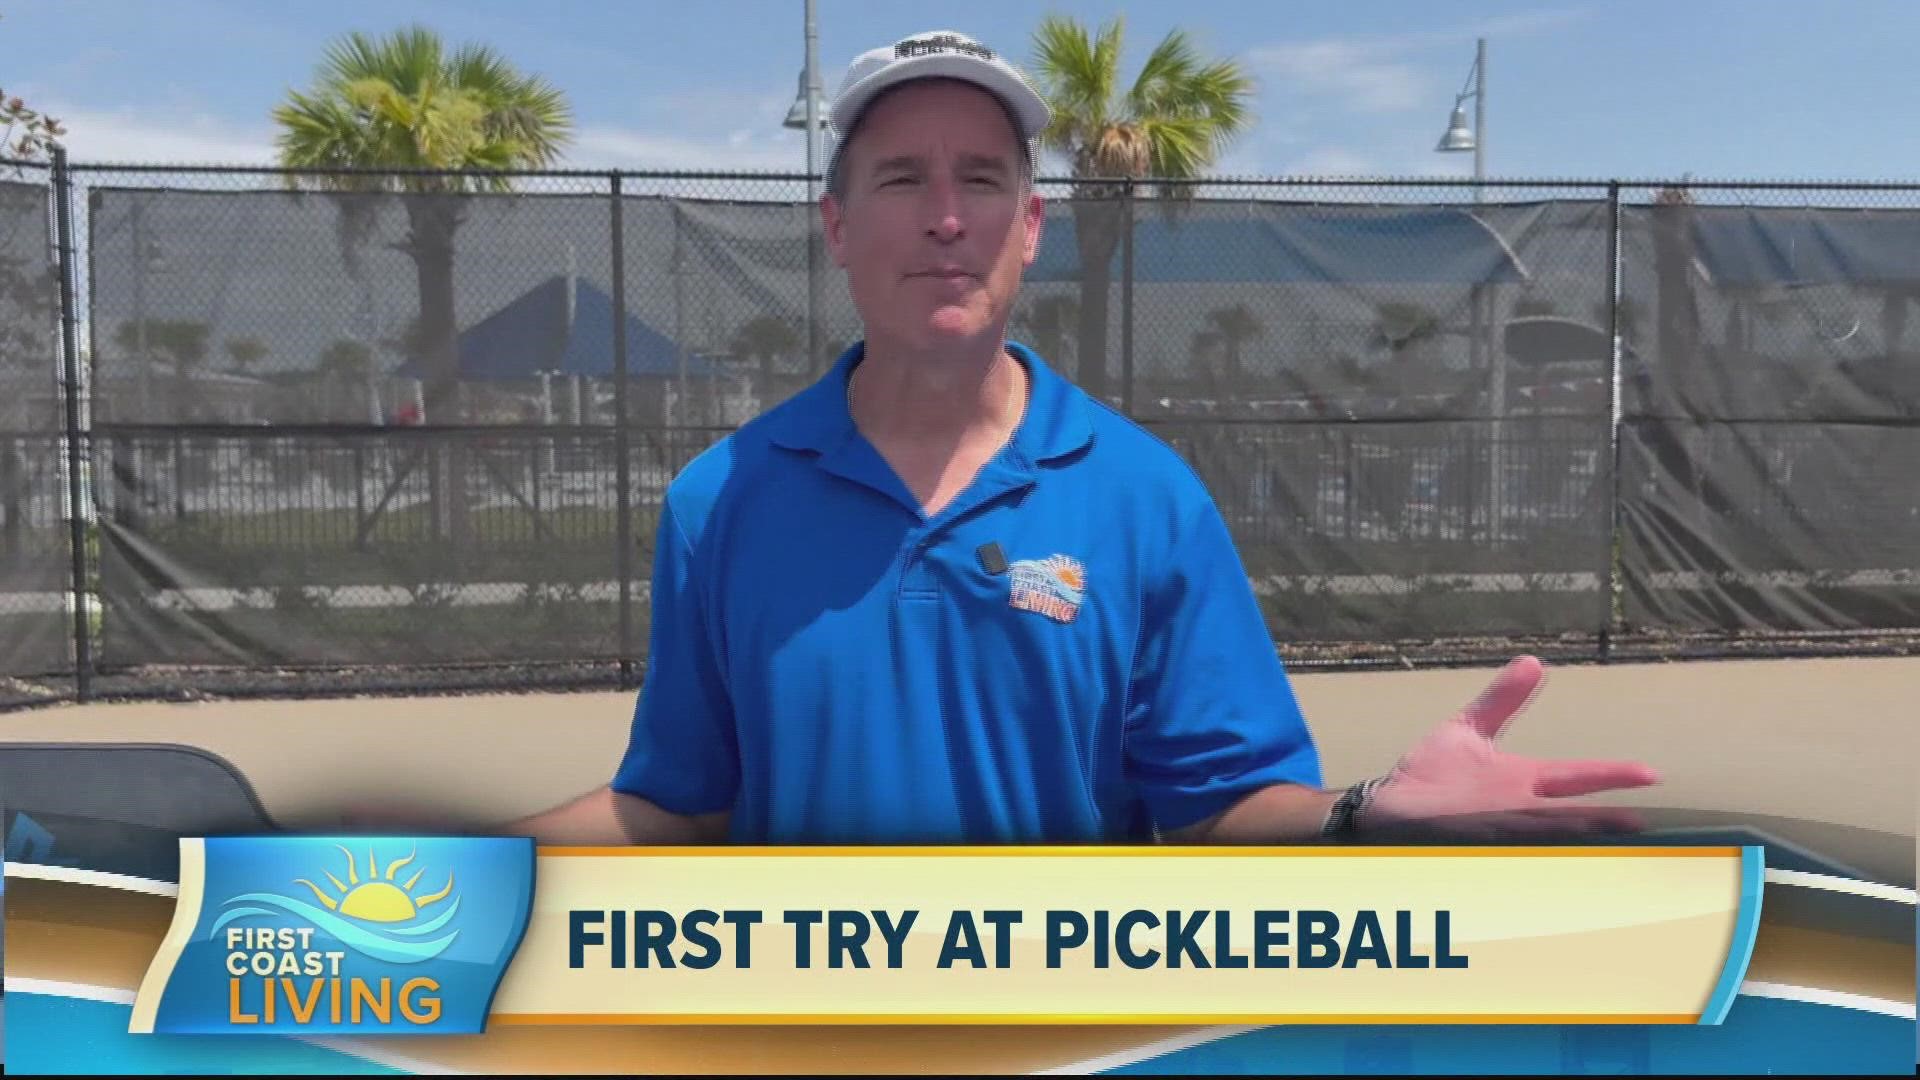 Mike Prangley hits the pickleball court and shows us what this pickle craze is all about.